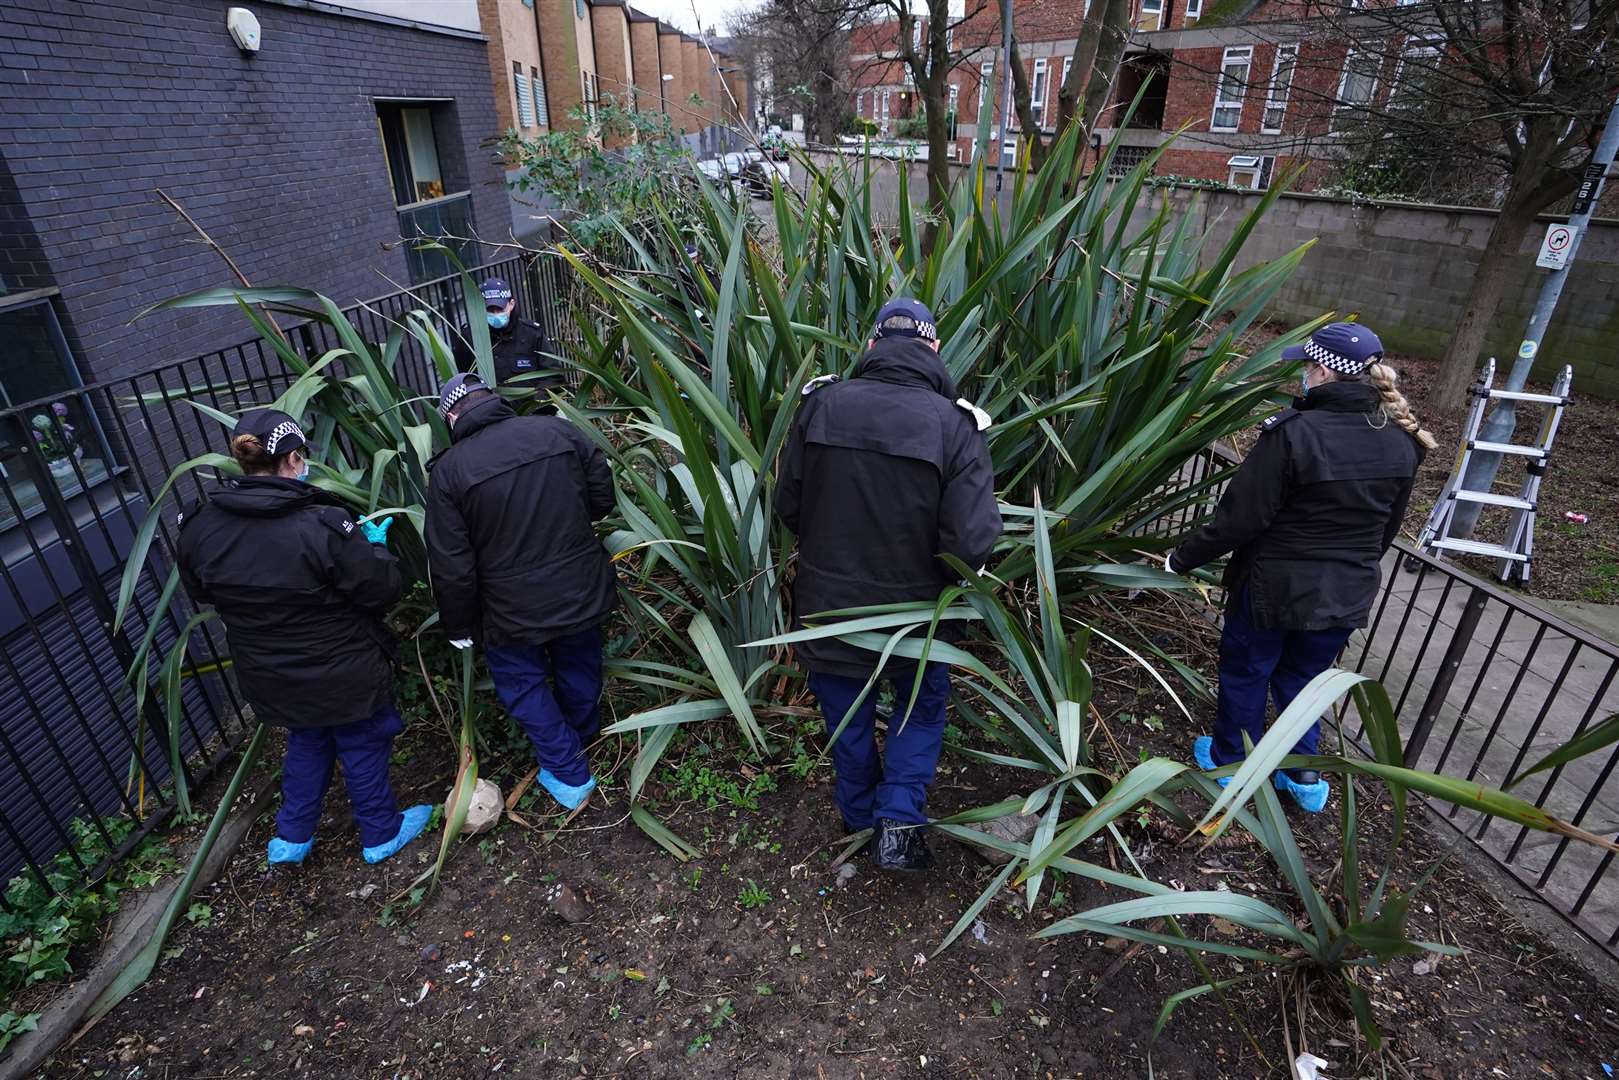 Police carried out investigations at the Abbey estate near St John’s Wood, north-west London (James Manning/PA)